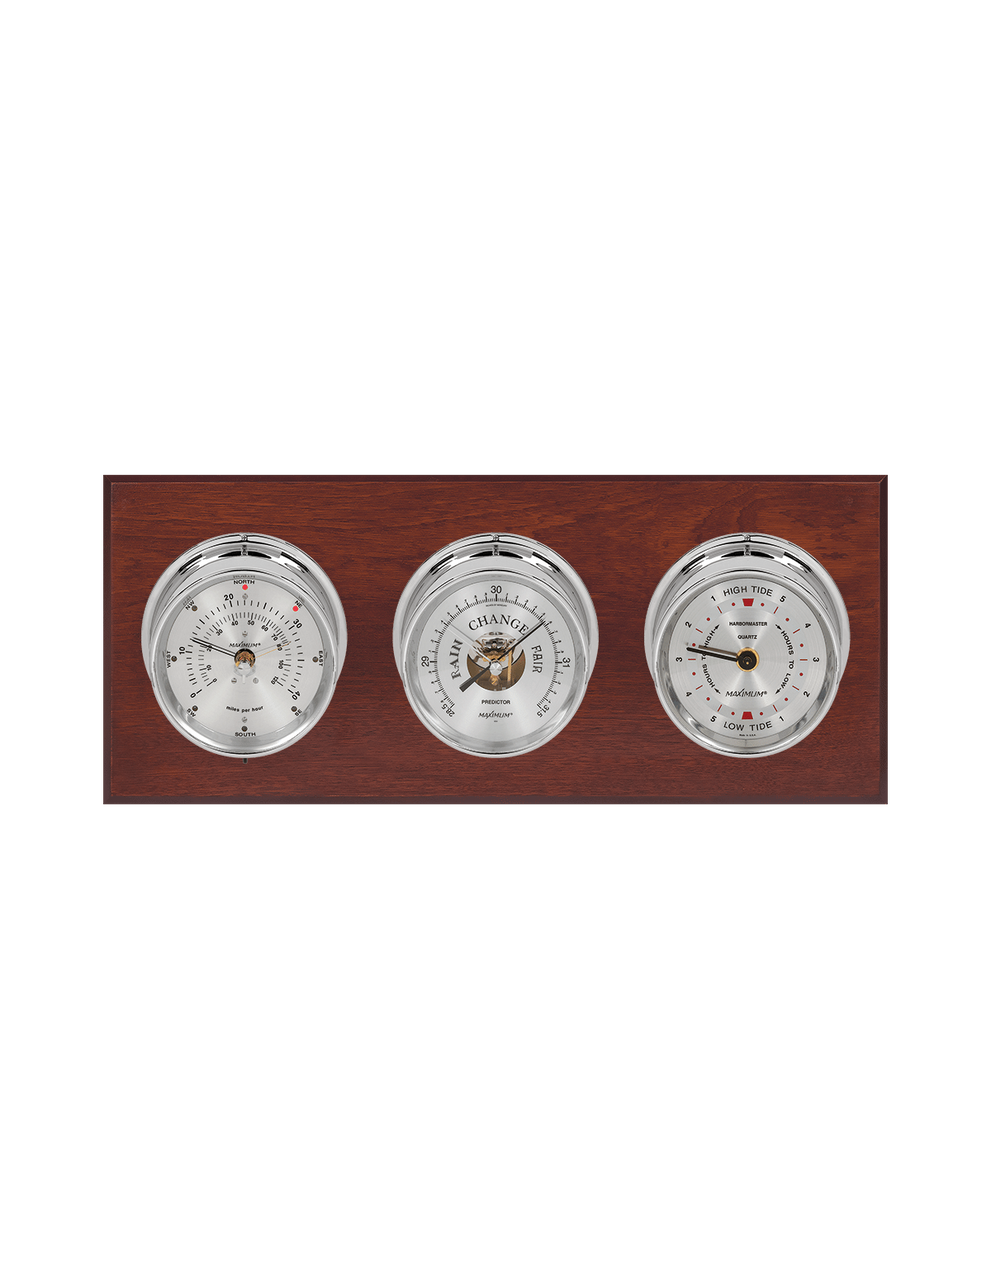 Newport Wind, Thermometer, and Tide Weather Station - 3 Instruments - Polished Chrome Cases  - Mahogany - 2 Scales -Reads 0-120 mph